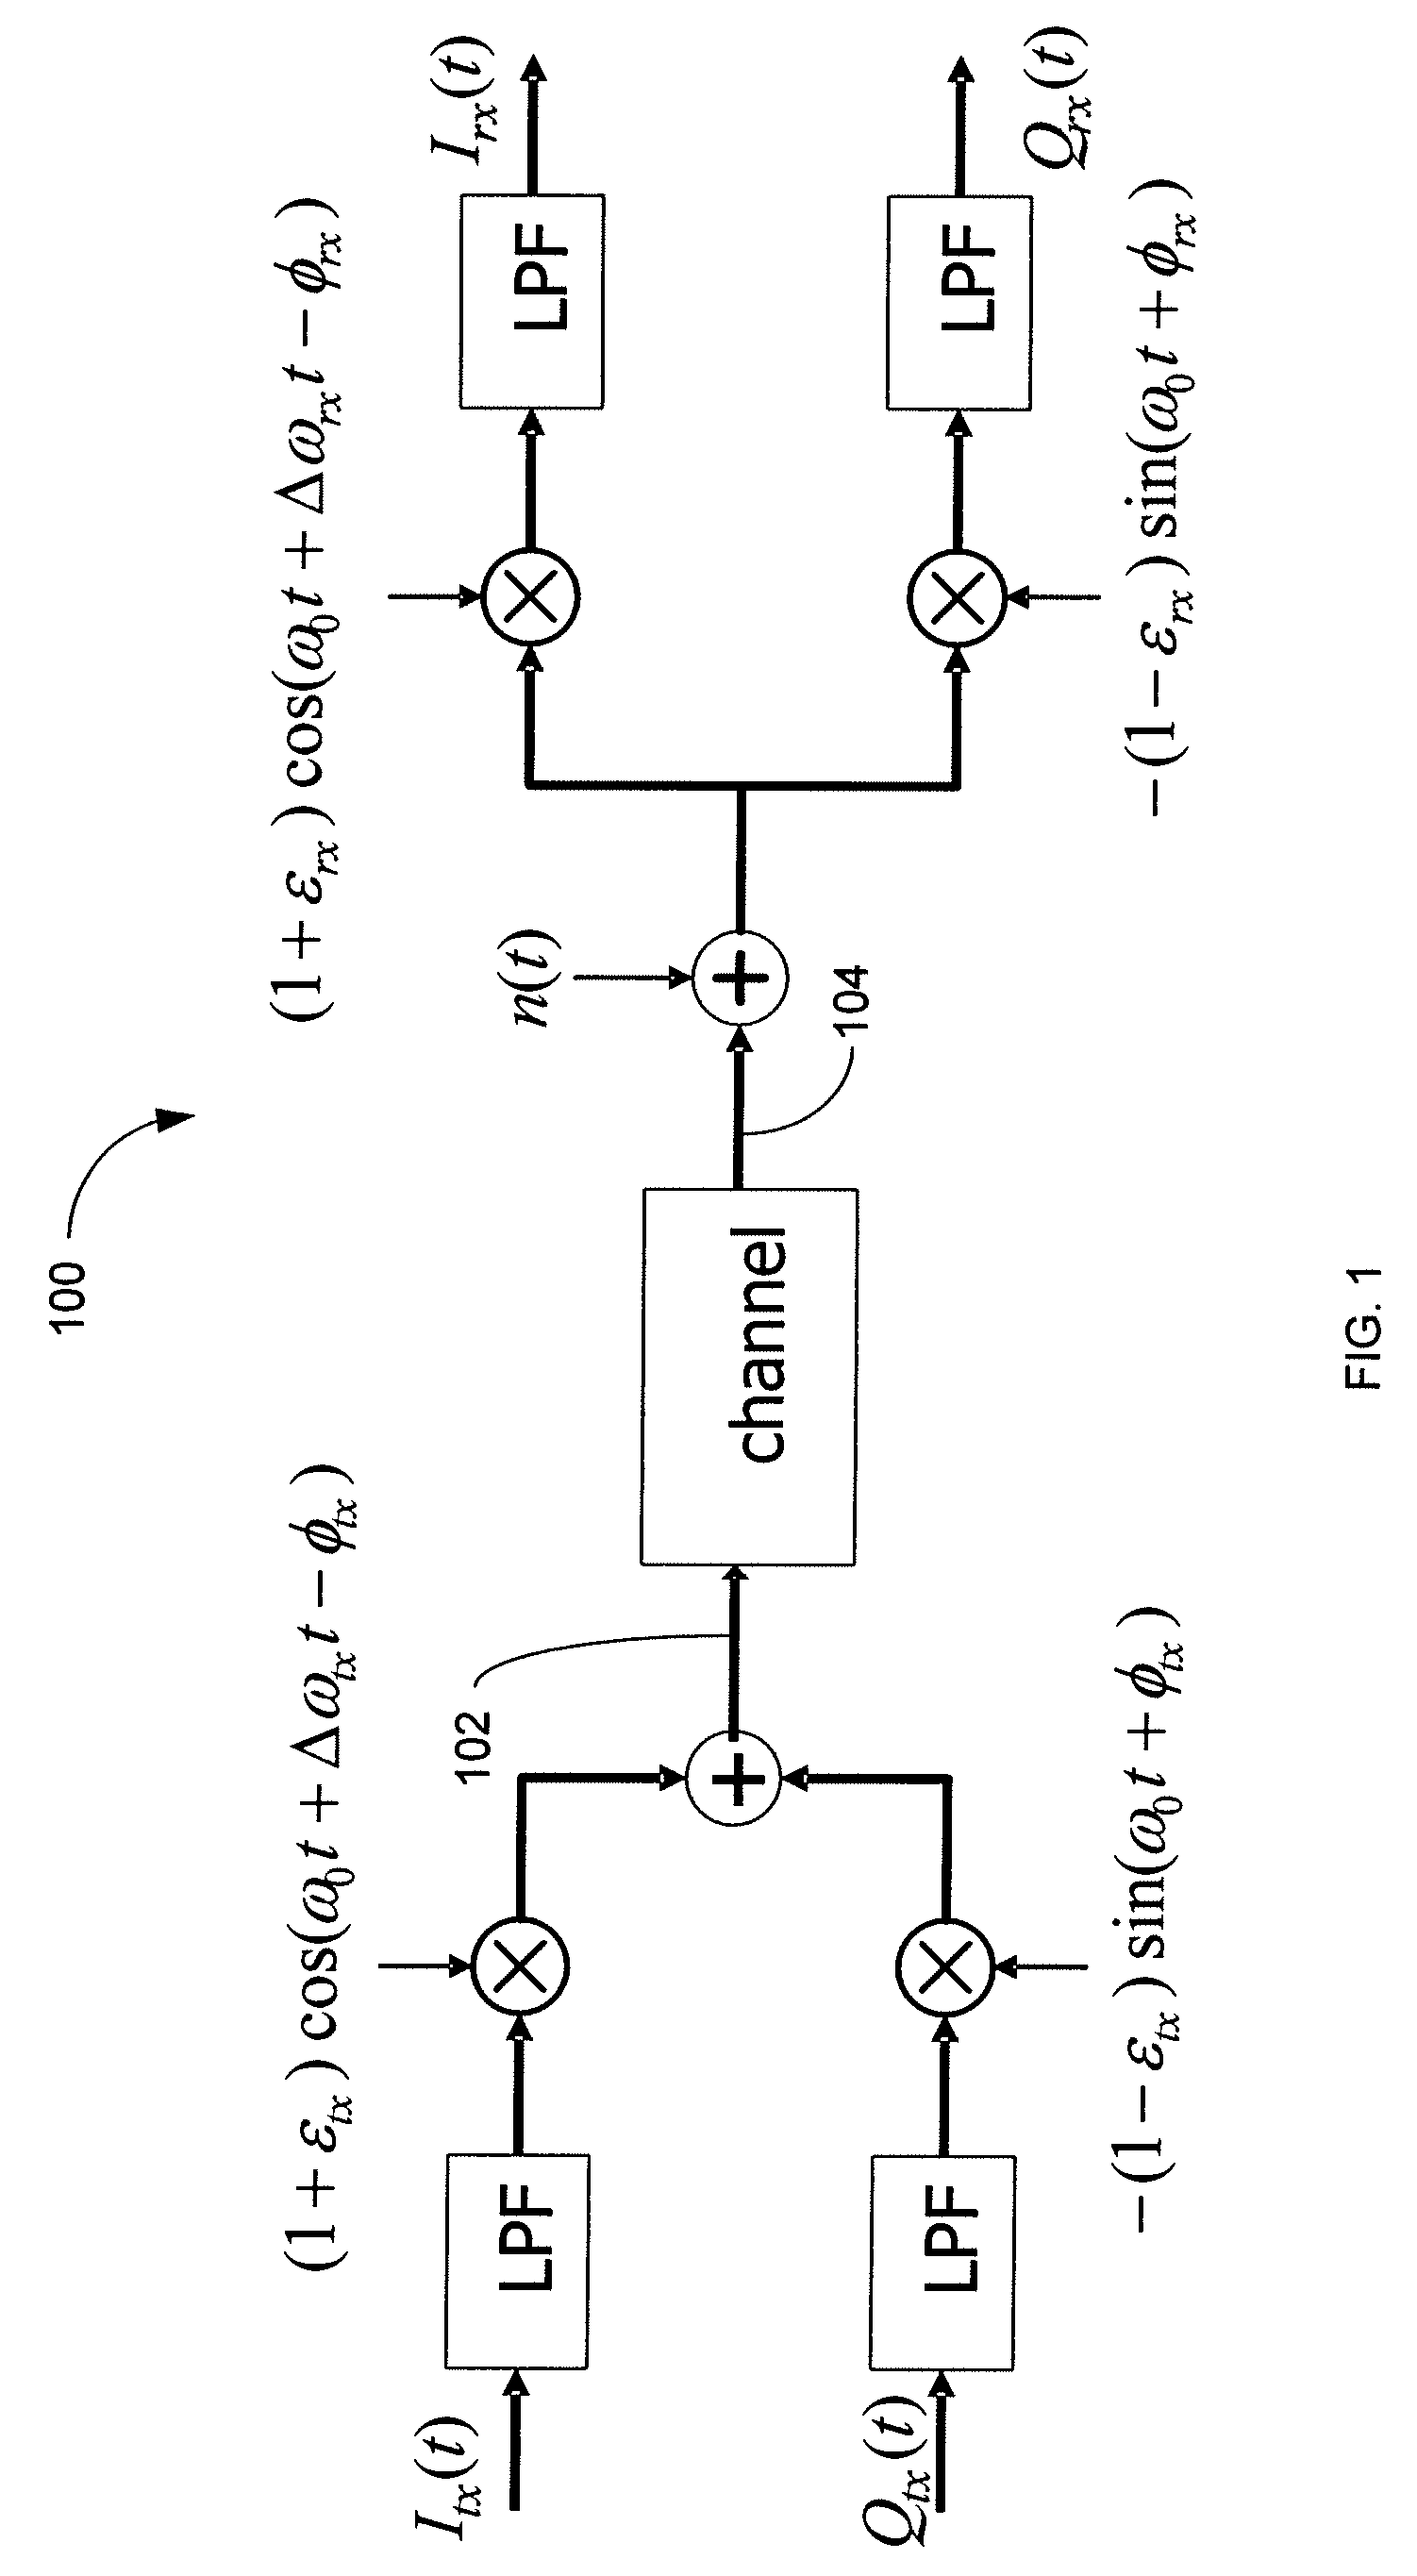 System and Method for IQ Imbalance Estimation Using Loopback with Frequency Offset